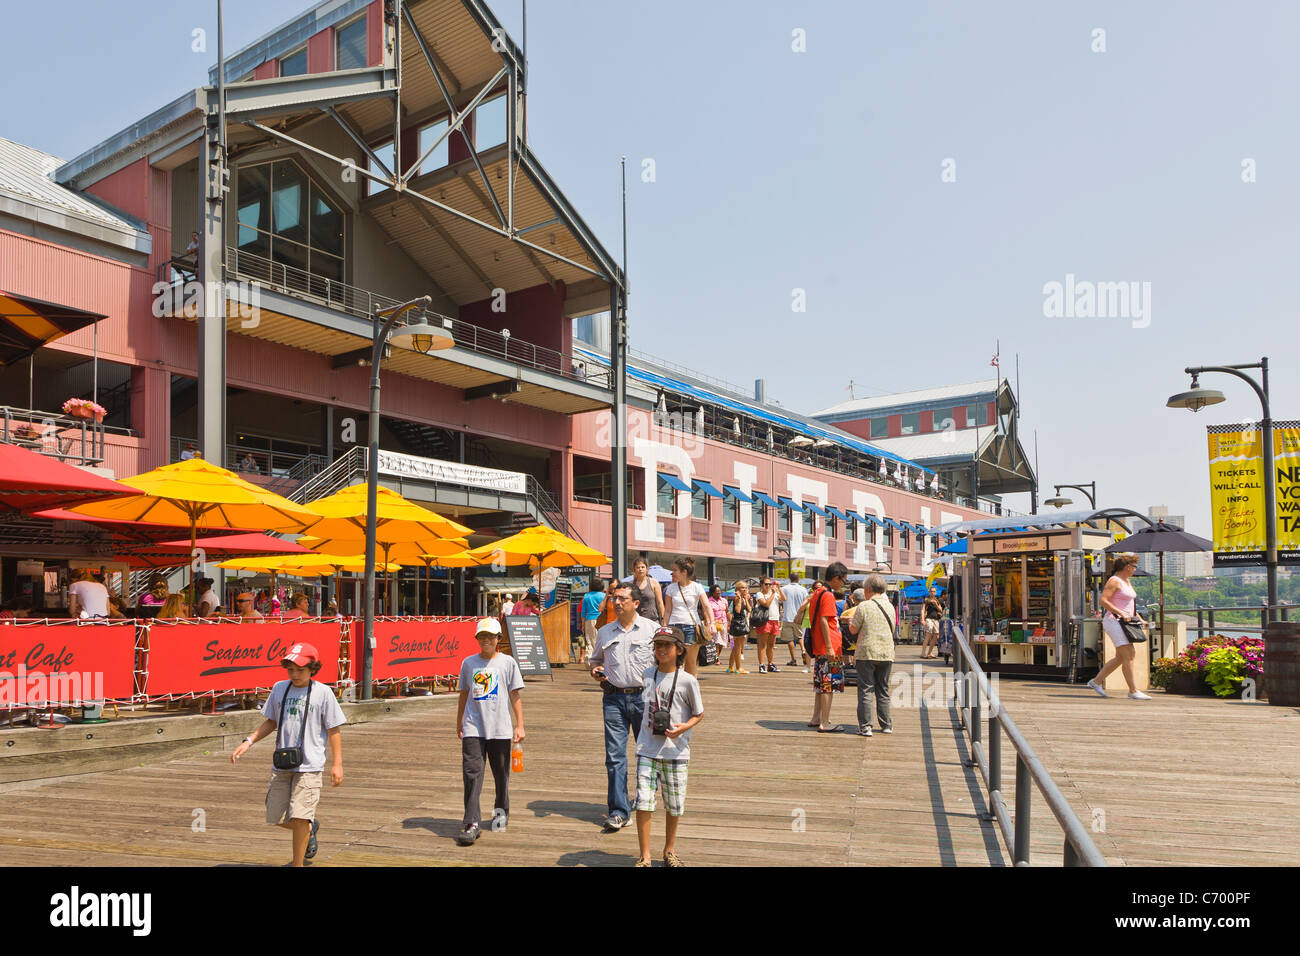 South Street Seaport Historic District in New York City Stock Photo